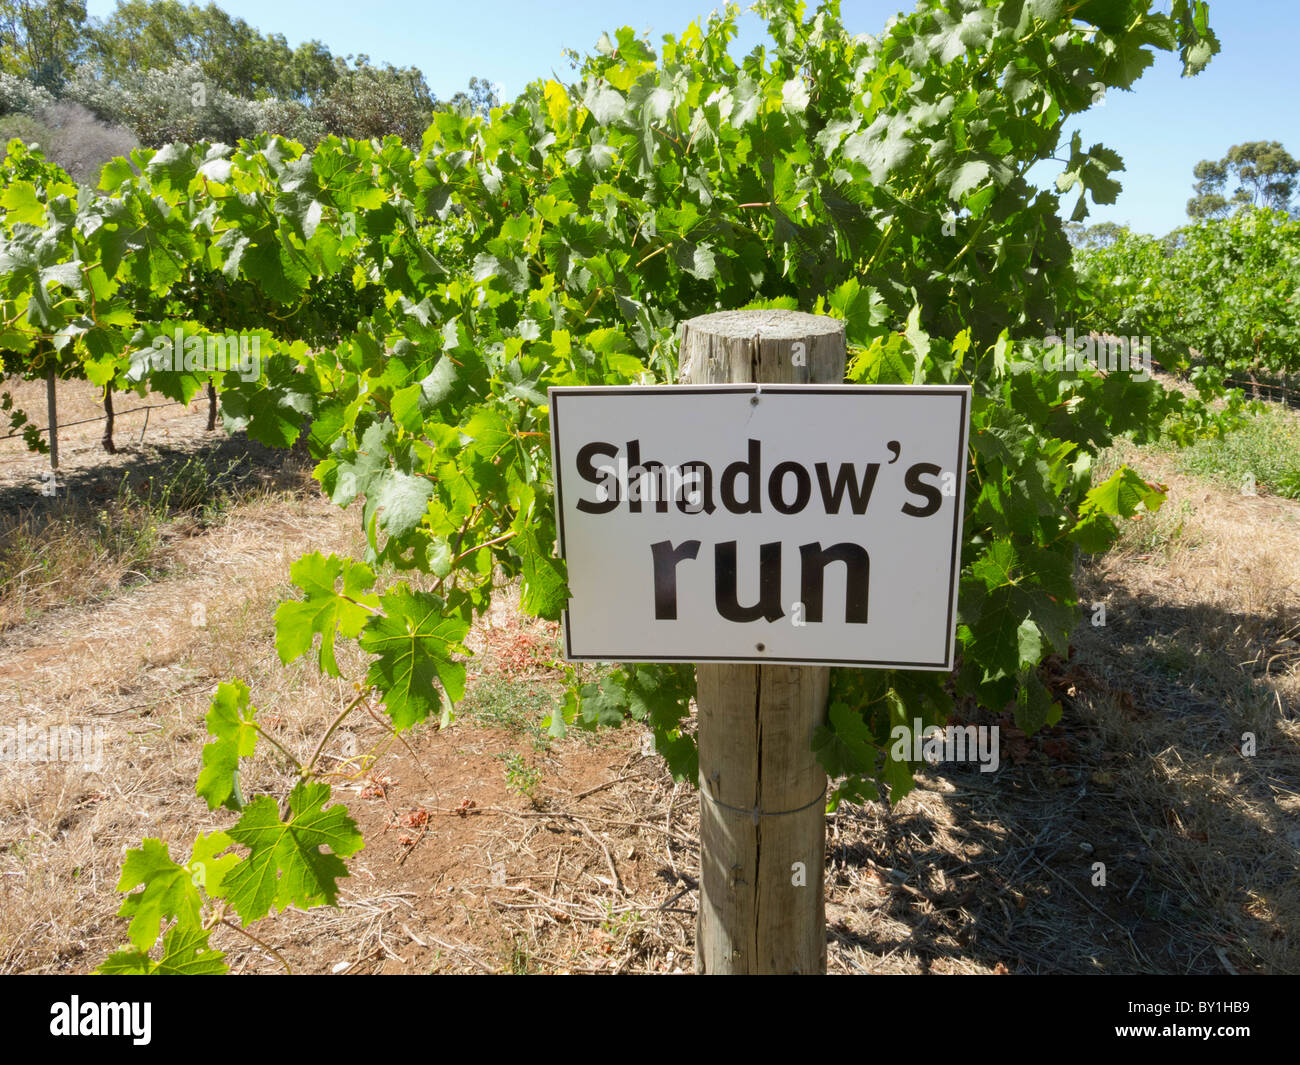 Detail of winery sign on grape vines at Mclaren Vale near Adelaide in South Australia Stock Photo